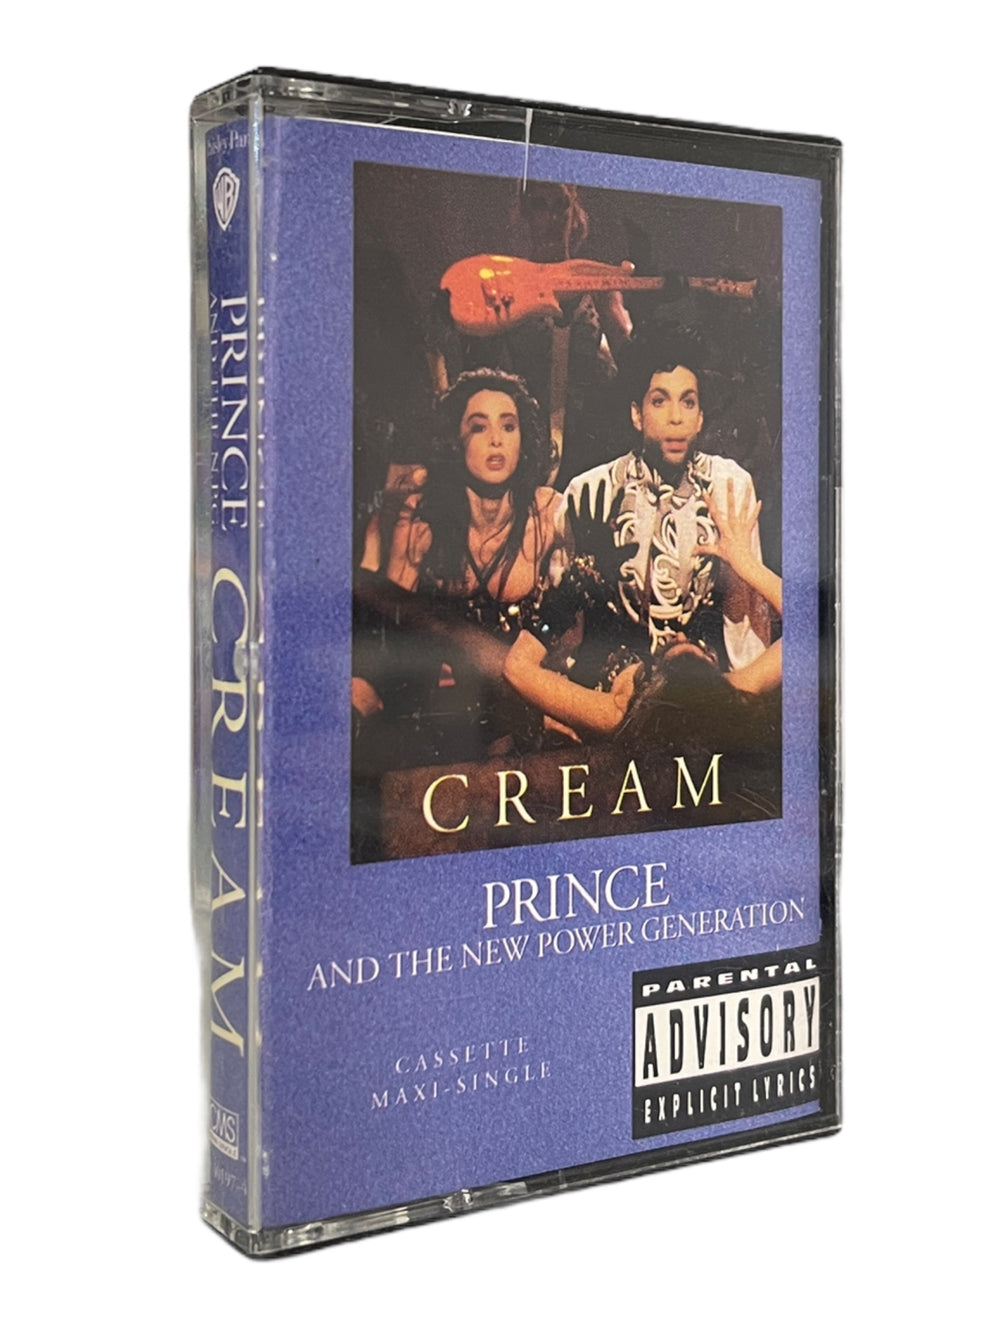 Prince – & The New Power Generation – Cream Cassette Single US Preloved: 1991